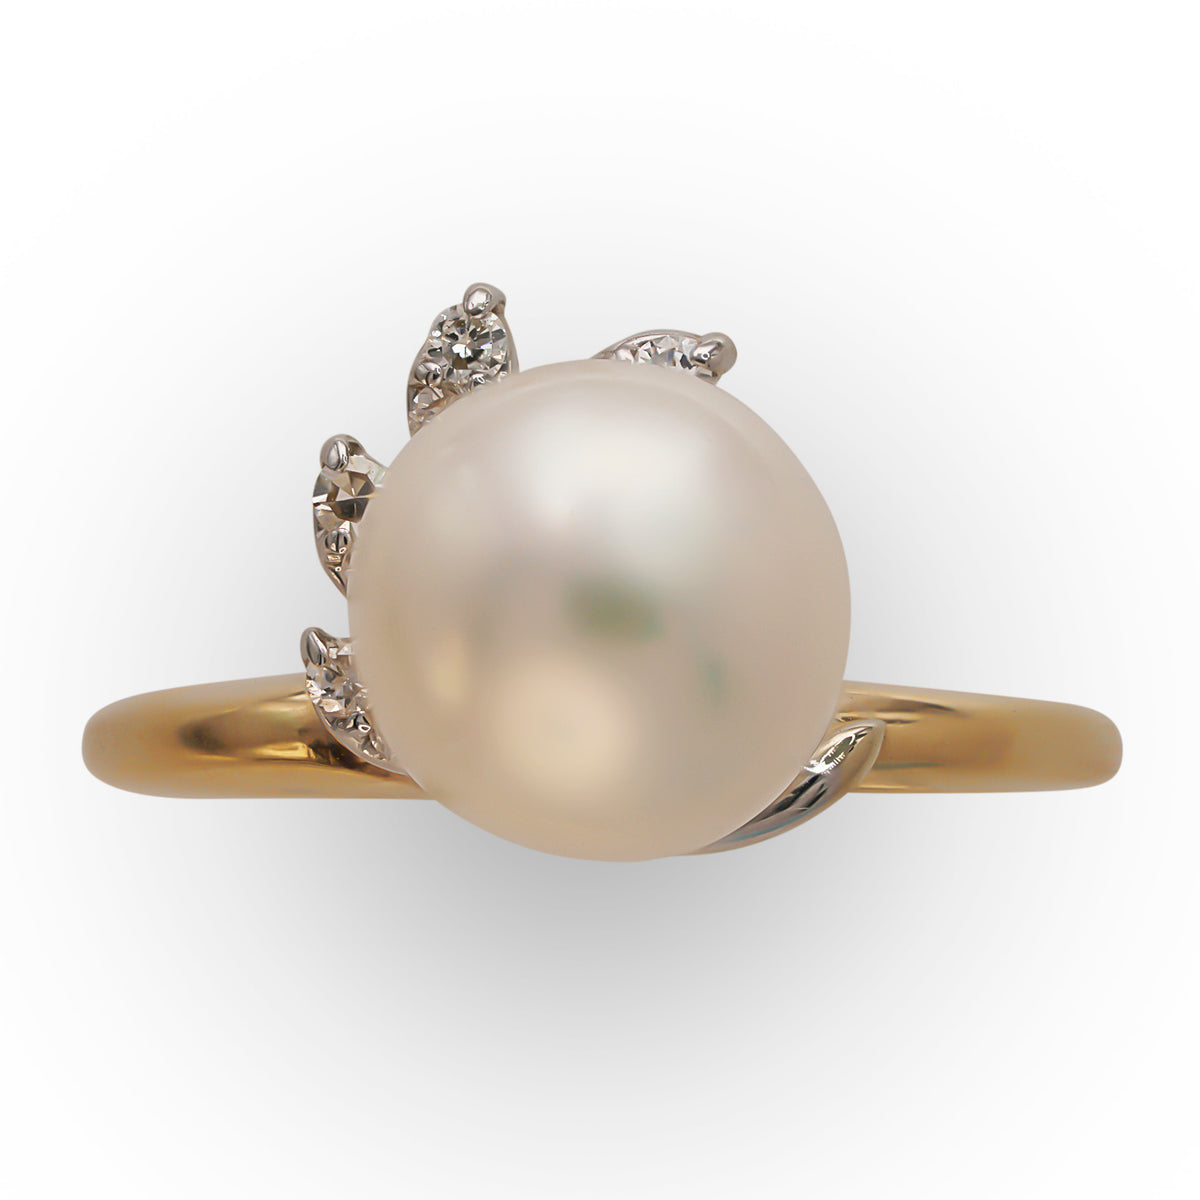 Pearl & Diamond Ring, Two tone 14kt yellow and white gold